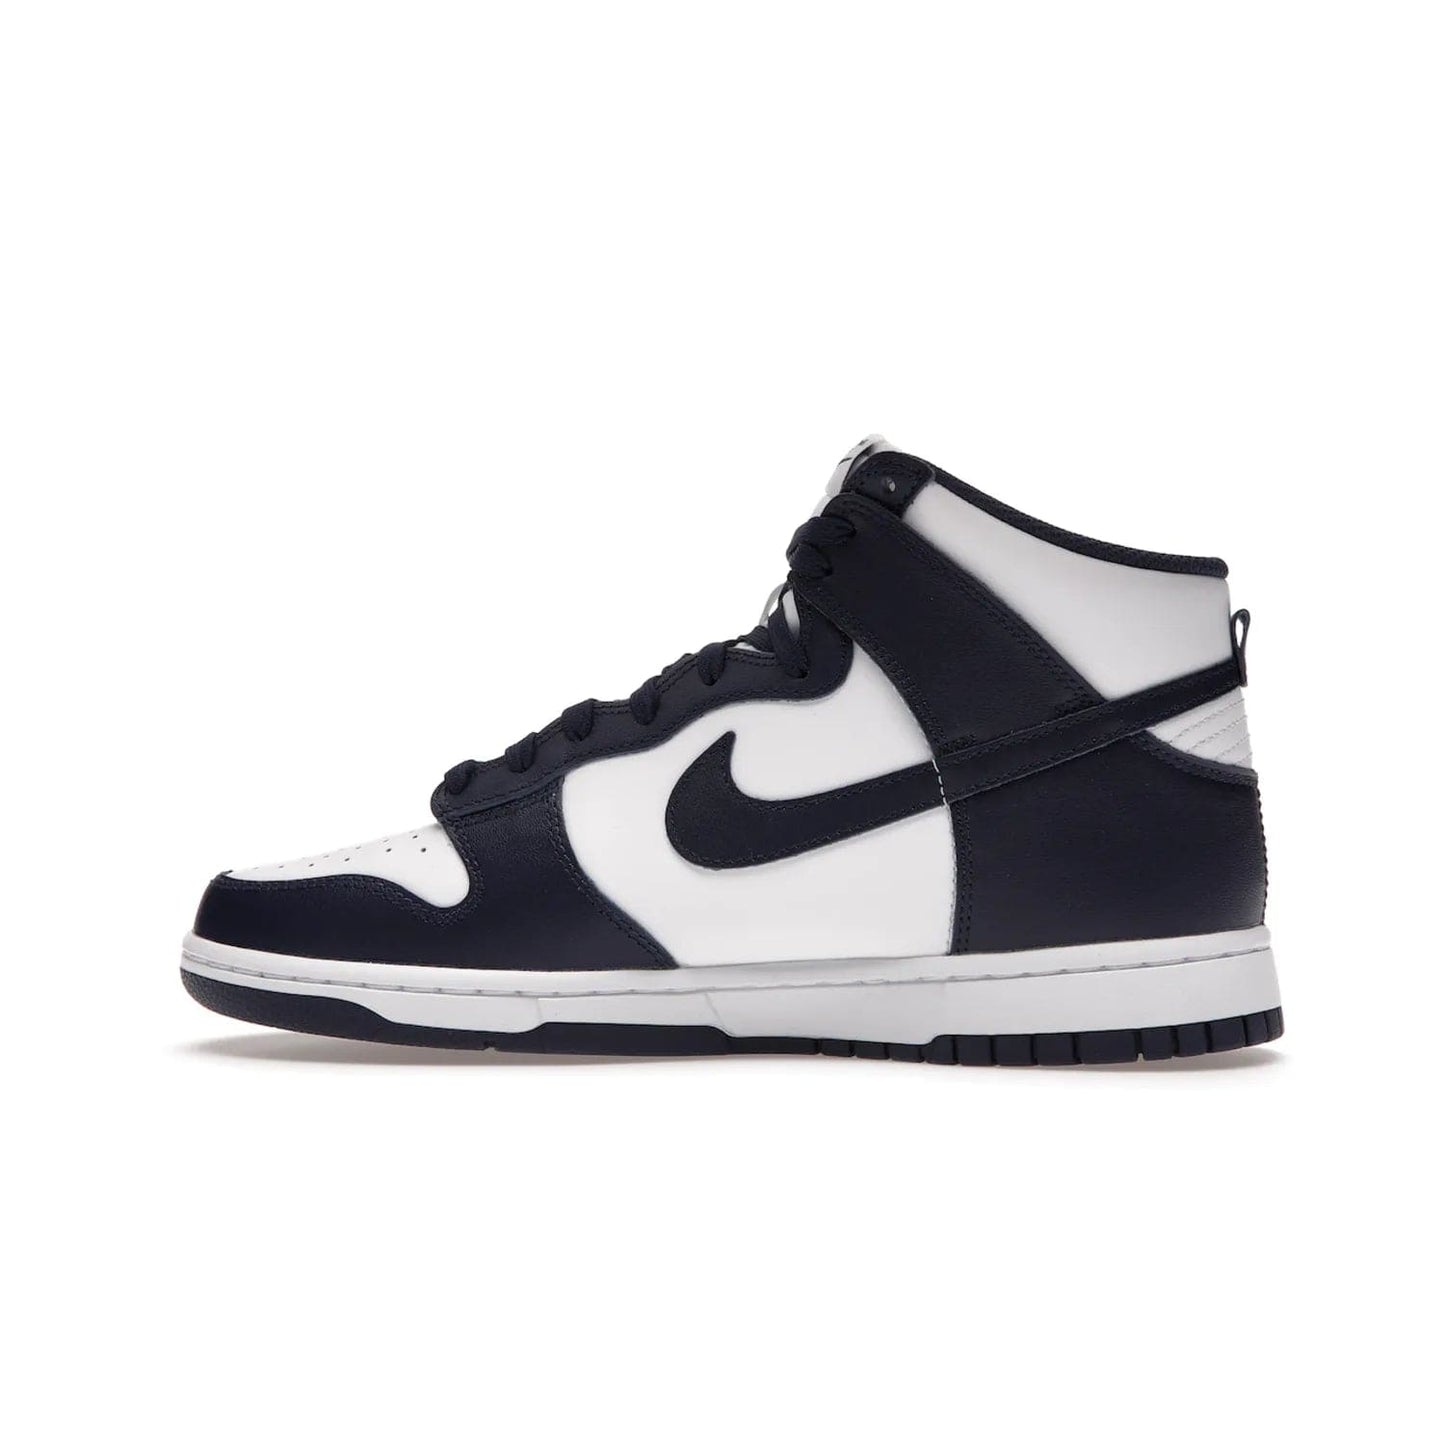 Nike Dunk High Championship Navy - Image 20 - Only at www.BallersClubKickz.com - Classic Nike Dunk High sneaker delivers an unforgettable style with white leather upper, Championship Navy overlays, and matching woven tongue label and sole. Make a statement with the Championship Navy today.